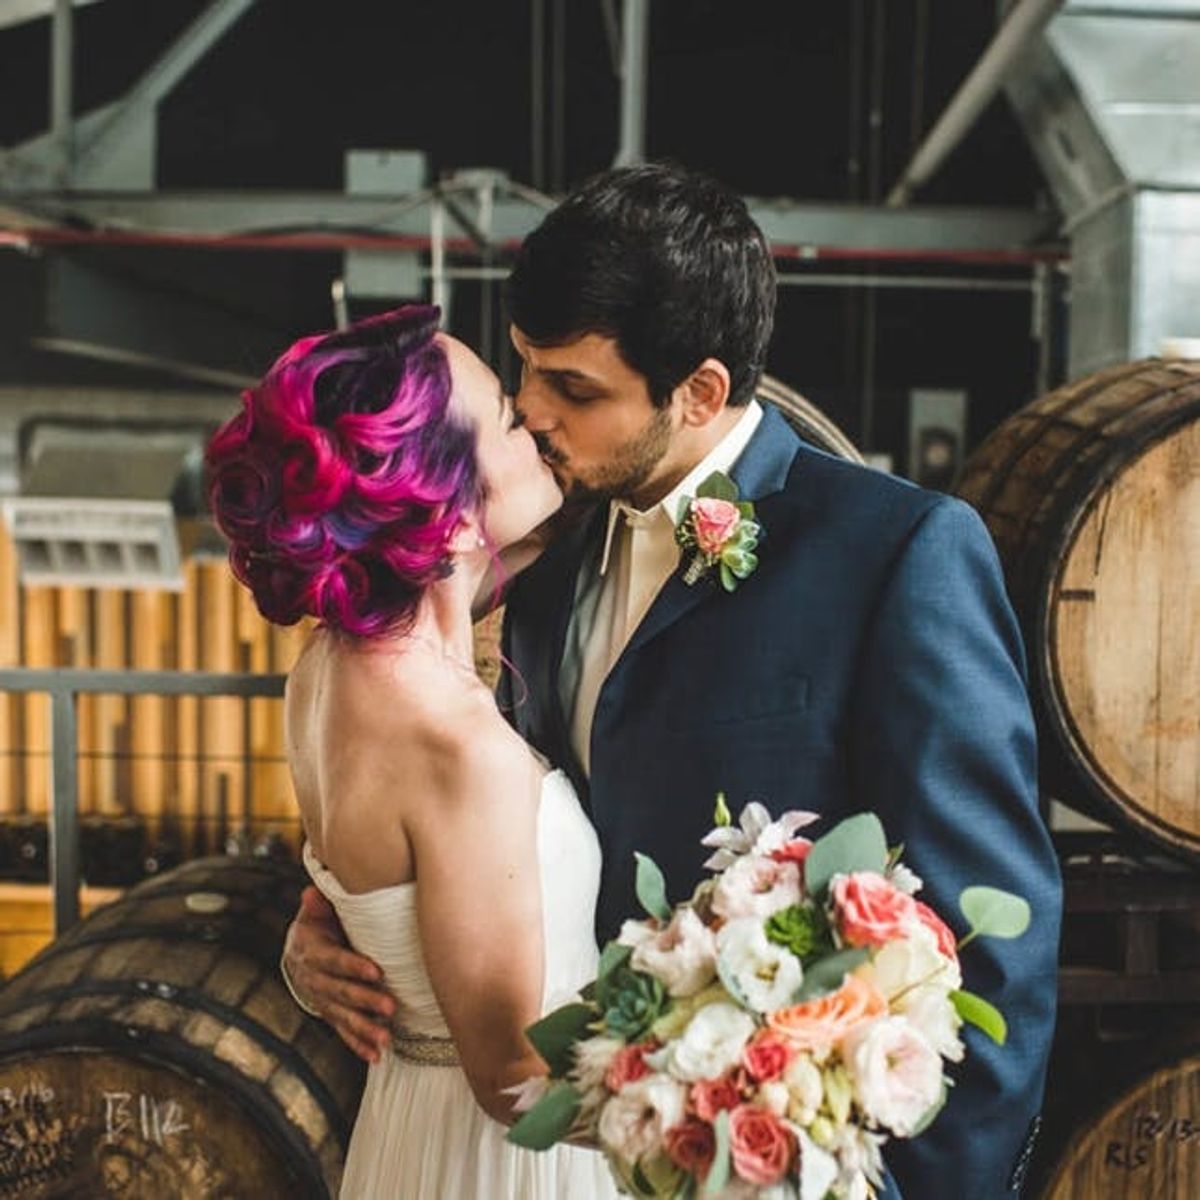 Brewery Weddings Are Officially a Thing and We Couldn’t Be *Hoppier*